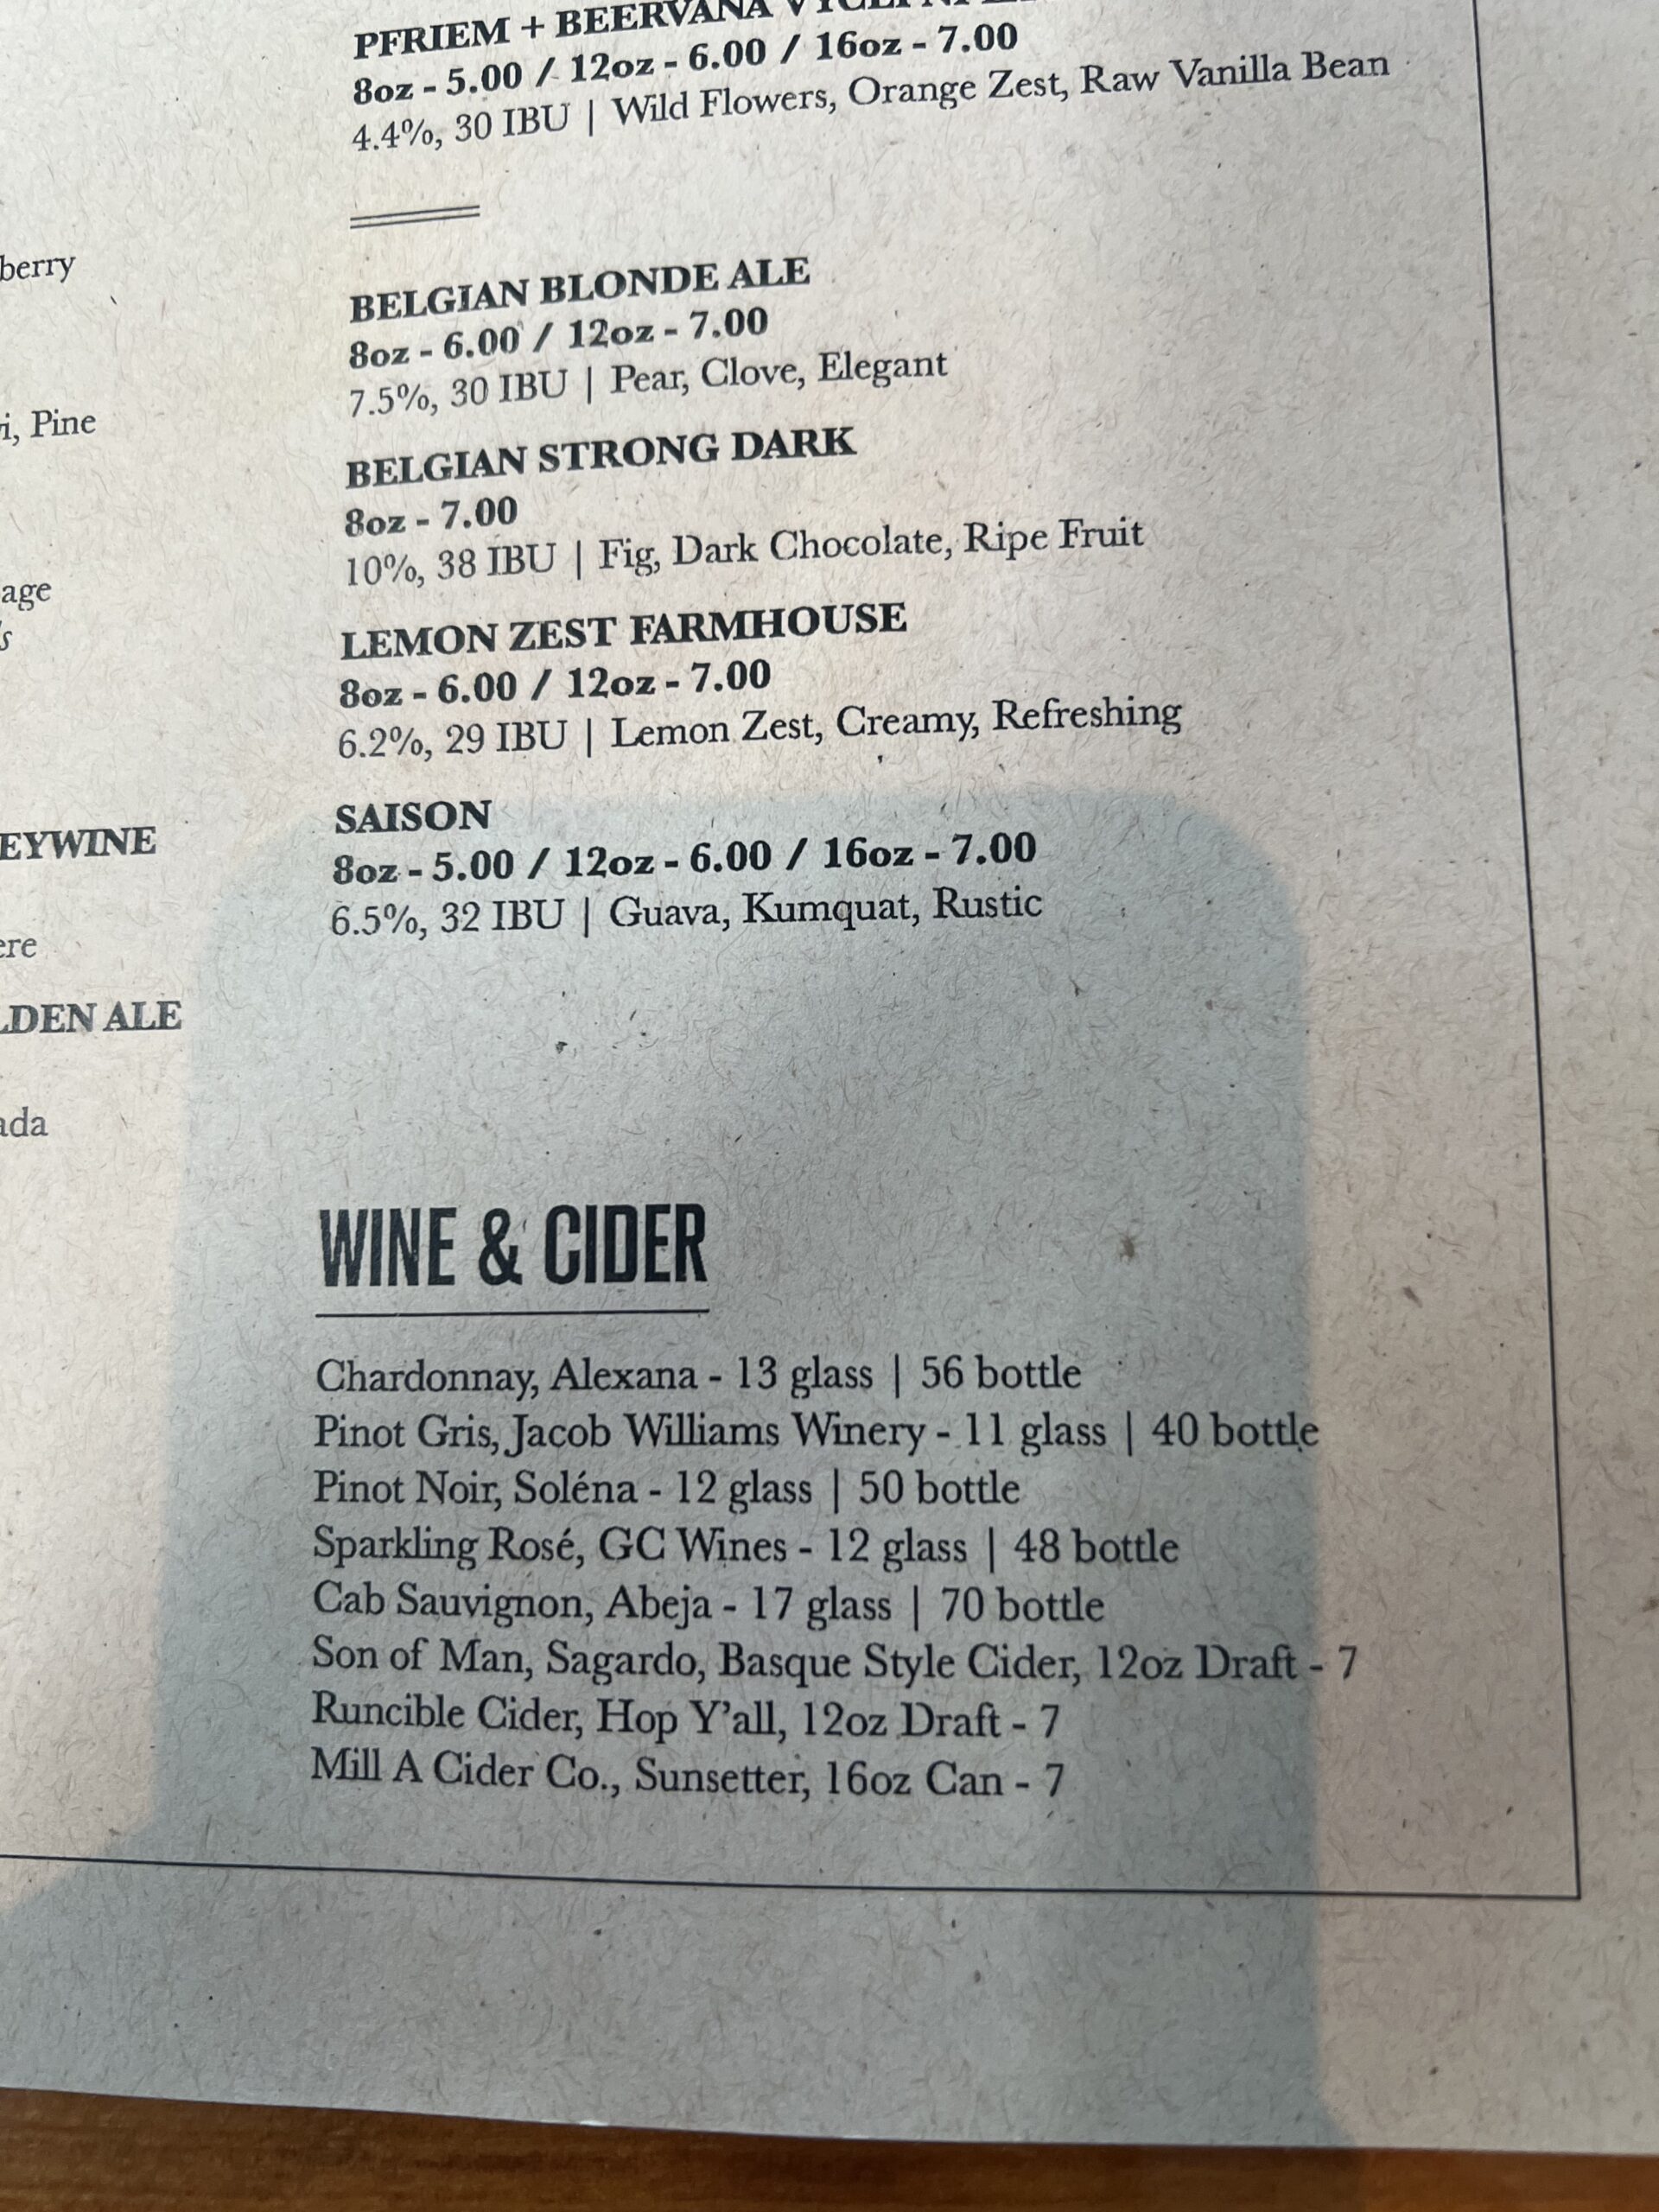 Wine and Cider menu items at Pfriem